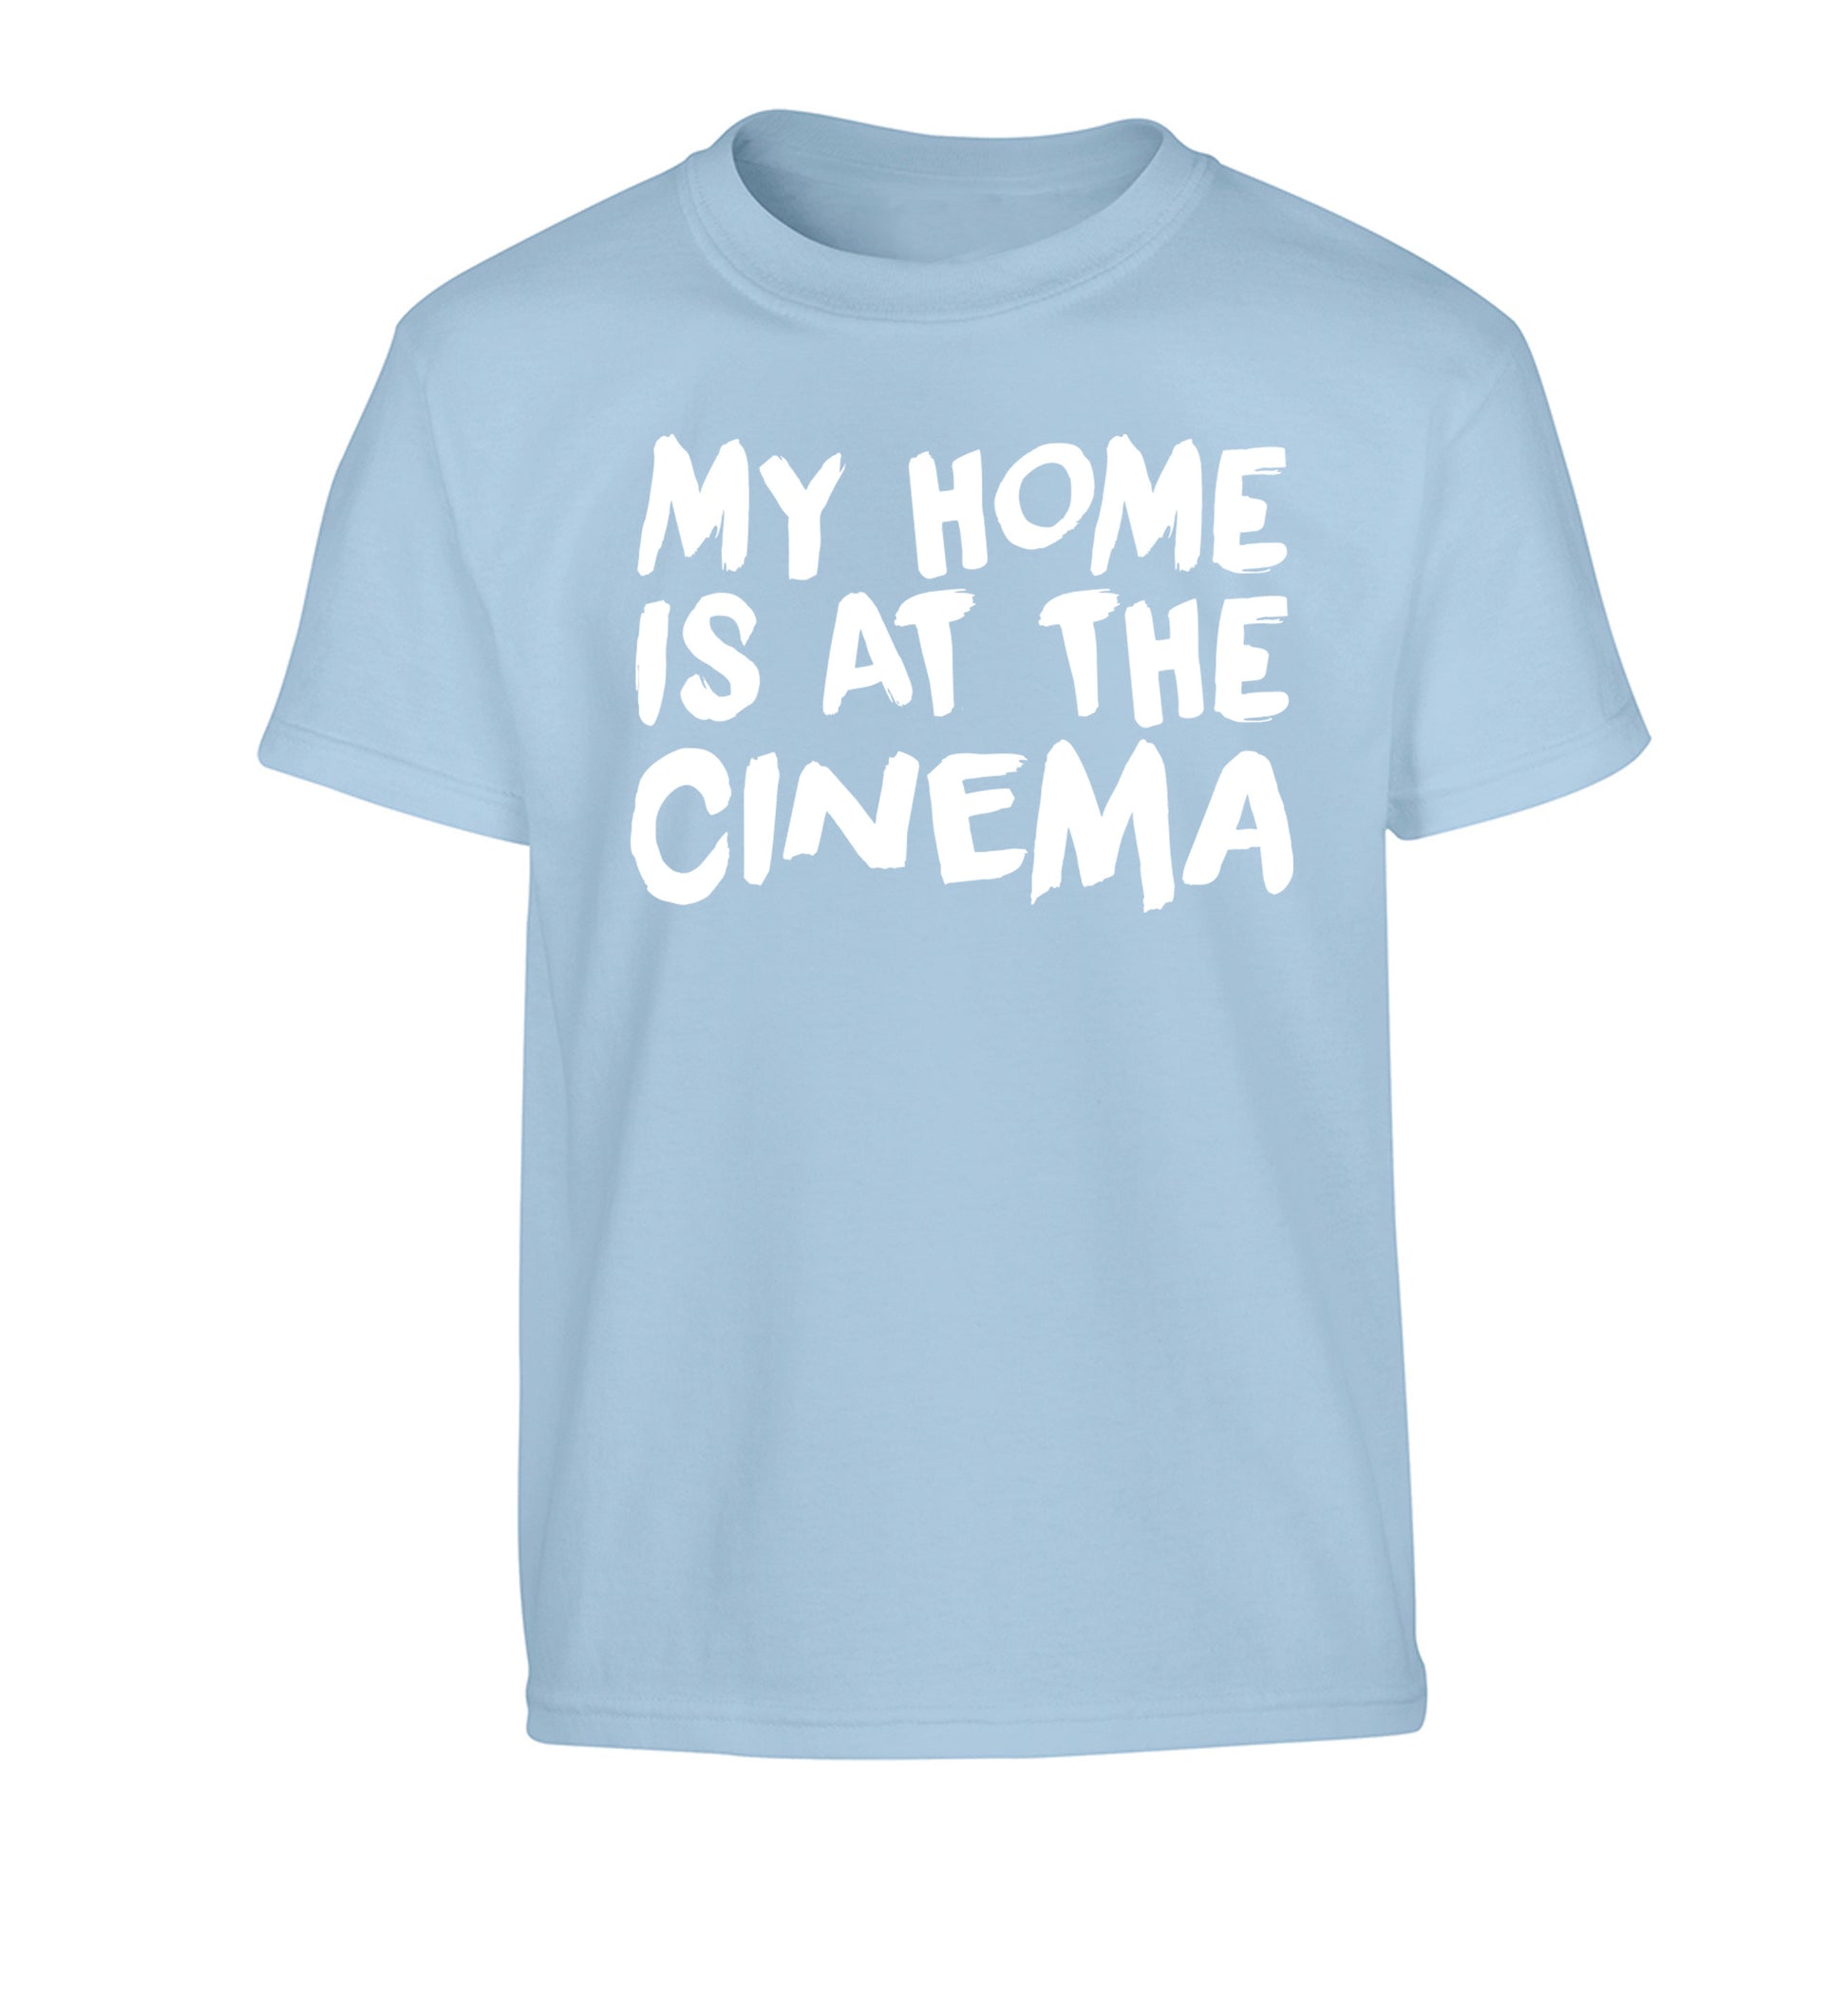 My home is at the cinema Children's light blue Tshirt 12-14 Years